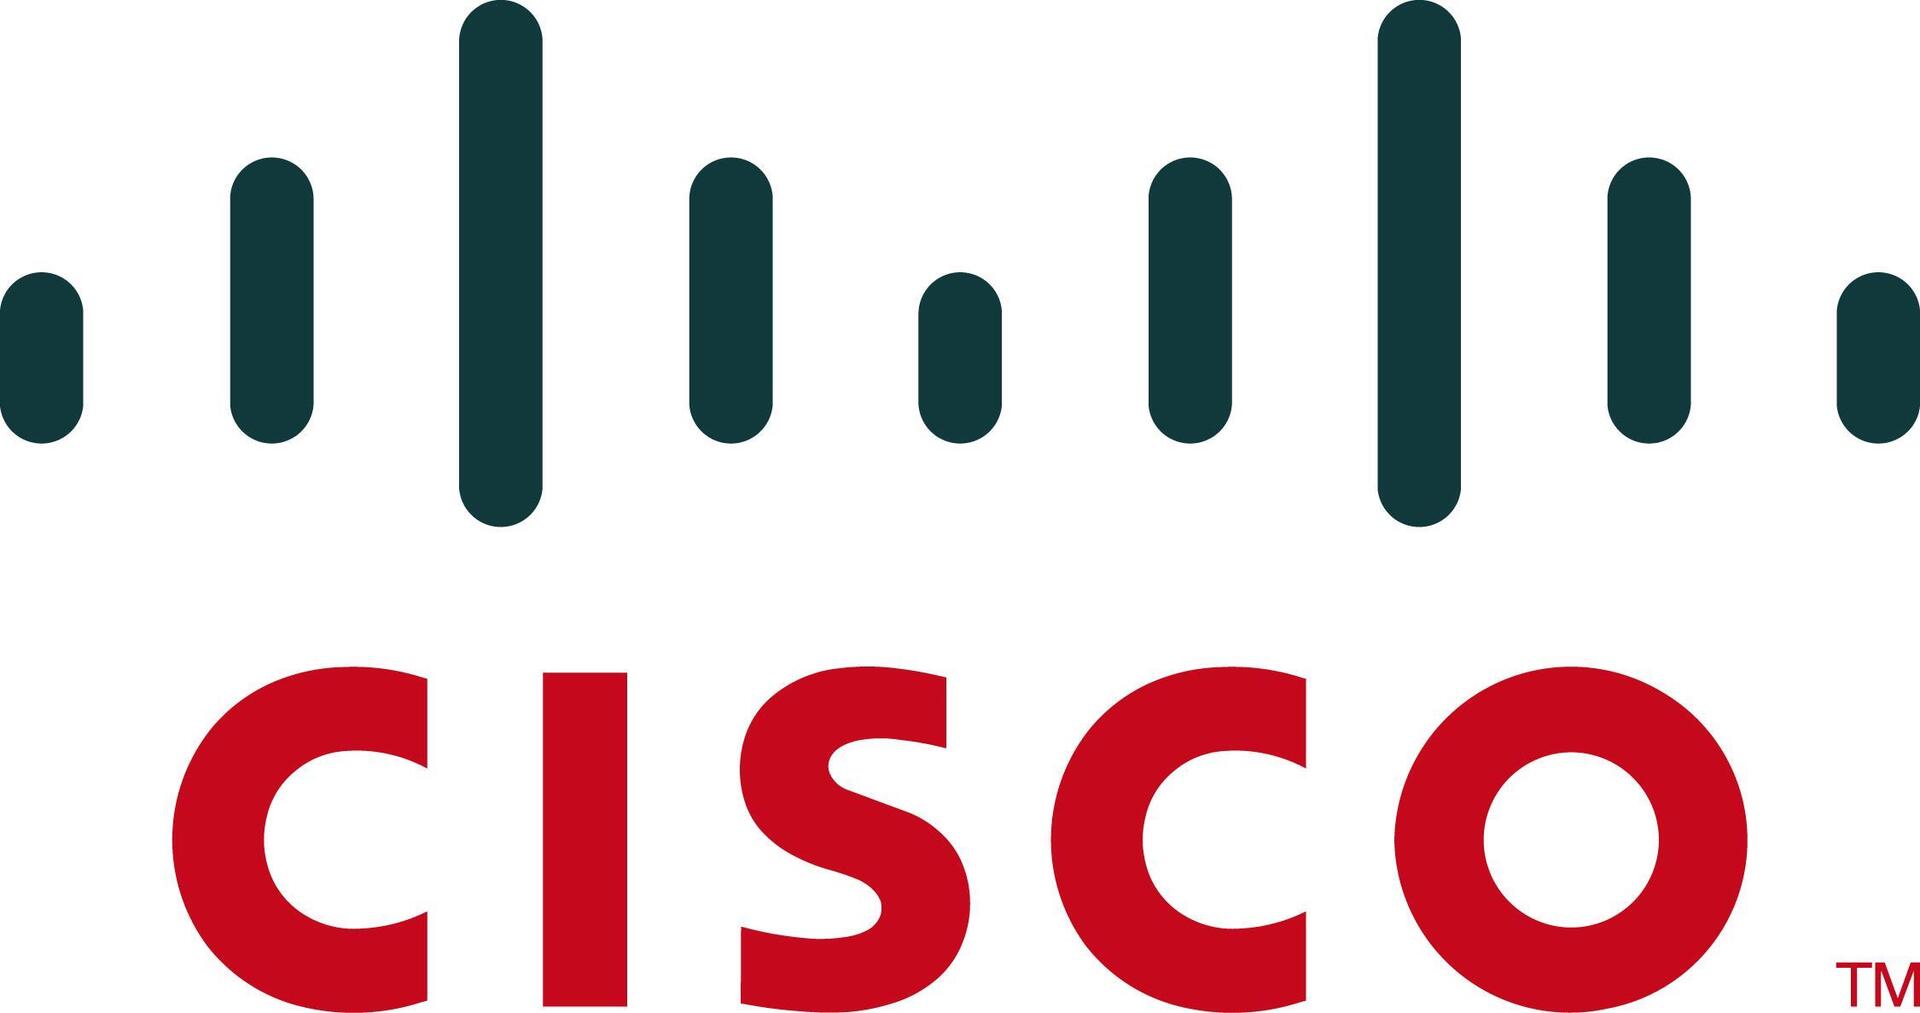 Cisco ASA with FirePOWER Services Advanced Malware Protection (L-ASA5508-AMP-3Y)